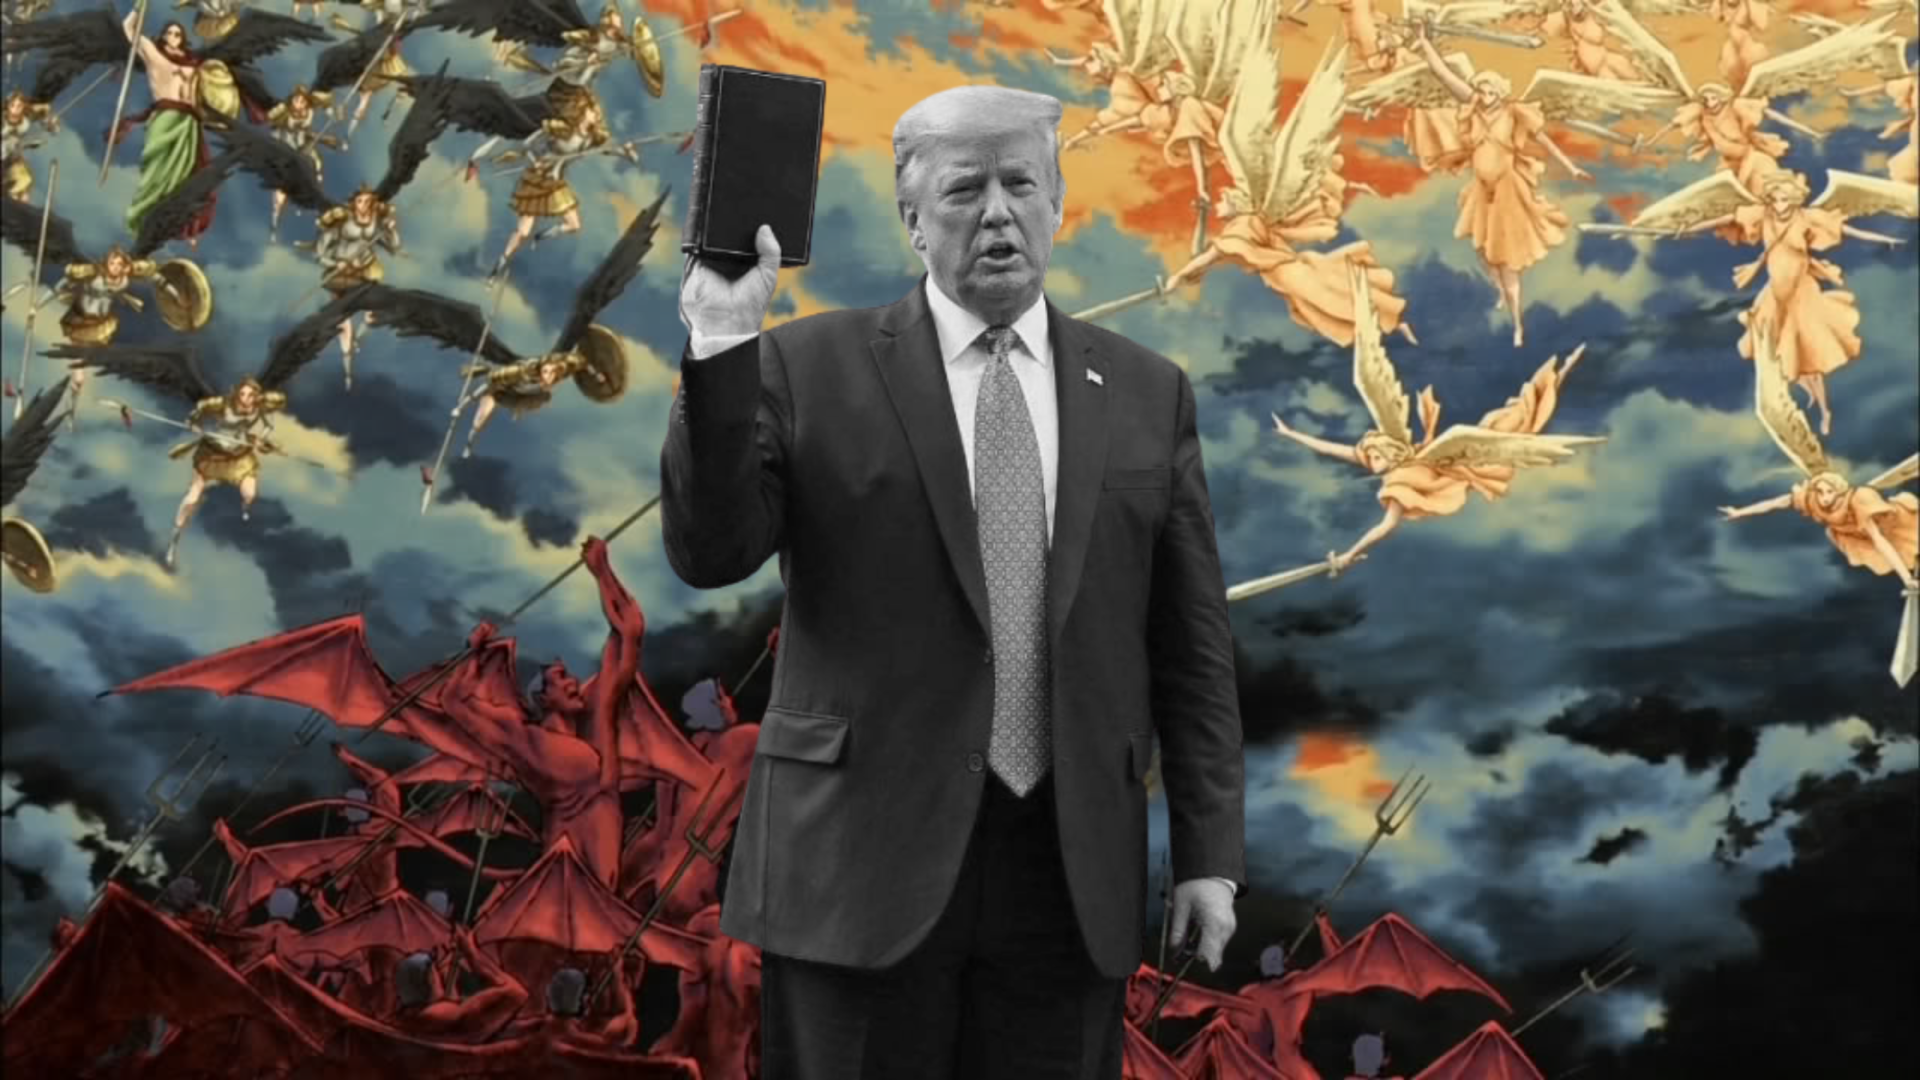 Trump with heaven and hell